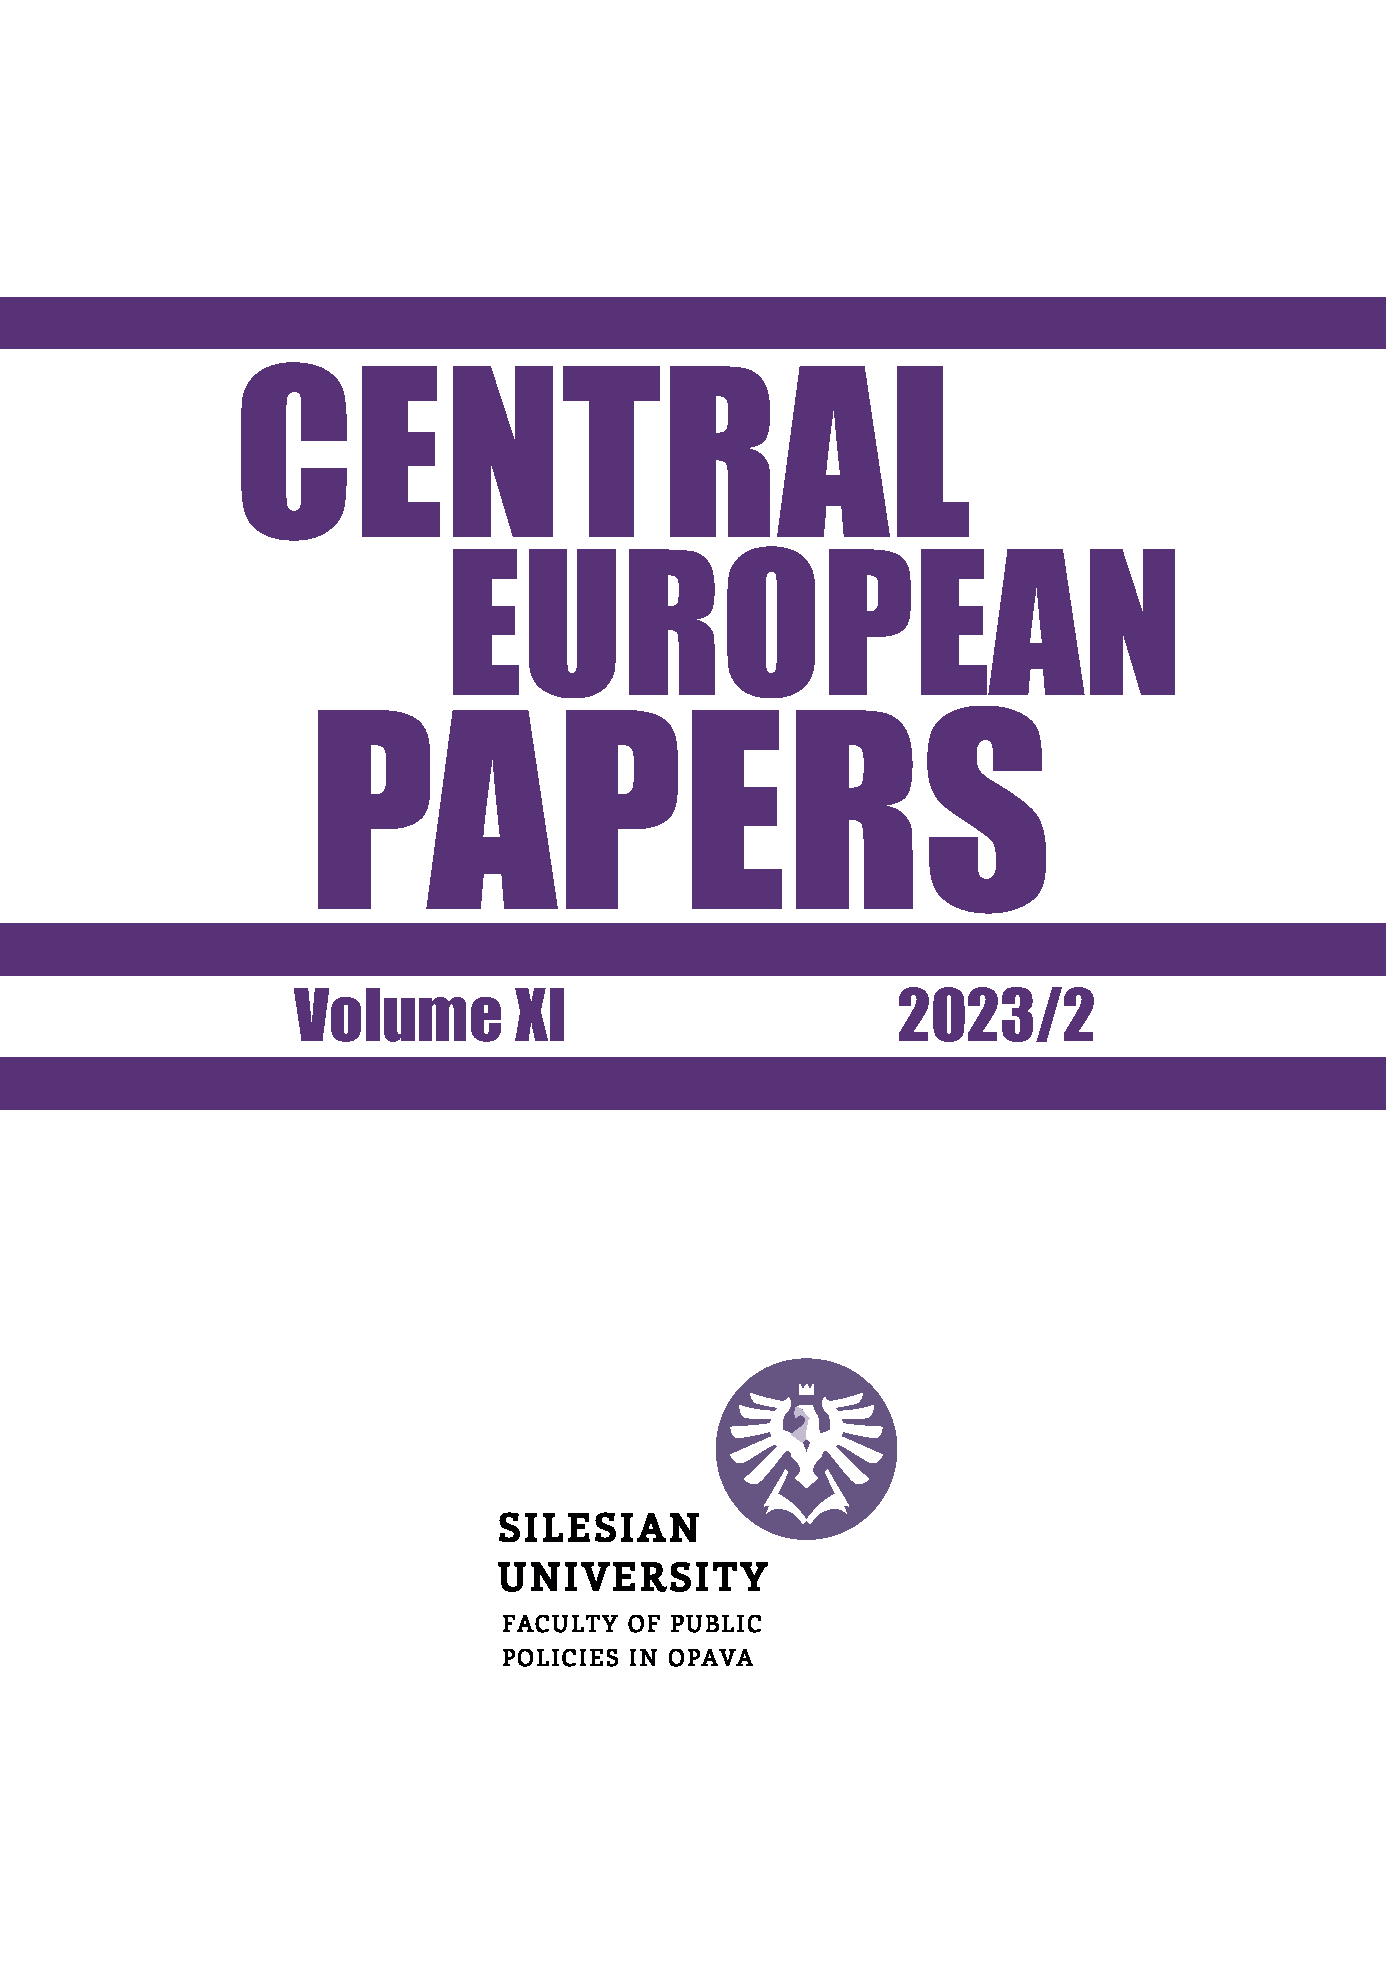 Development and comparison of the relationship between heads of state and judicial power in Europe